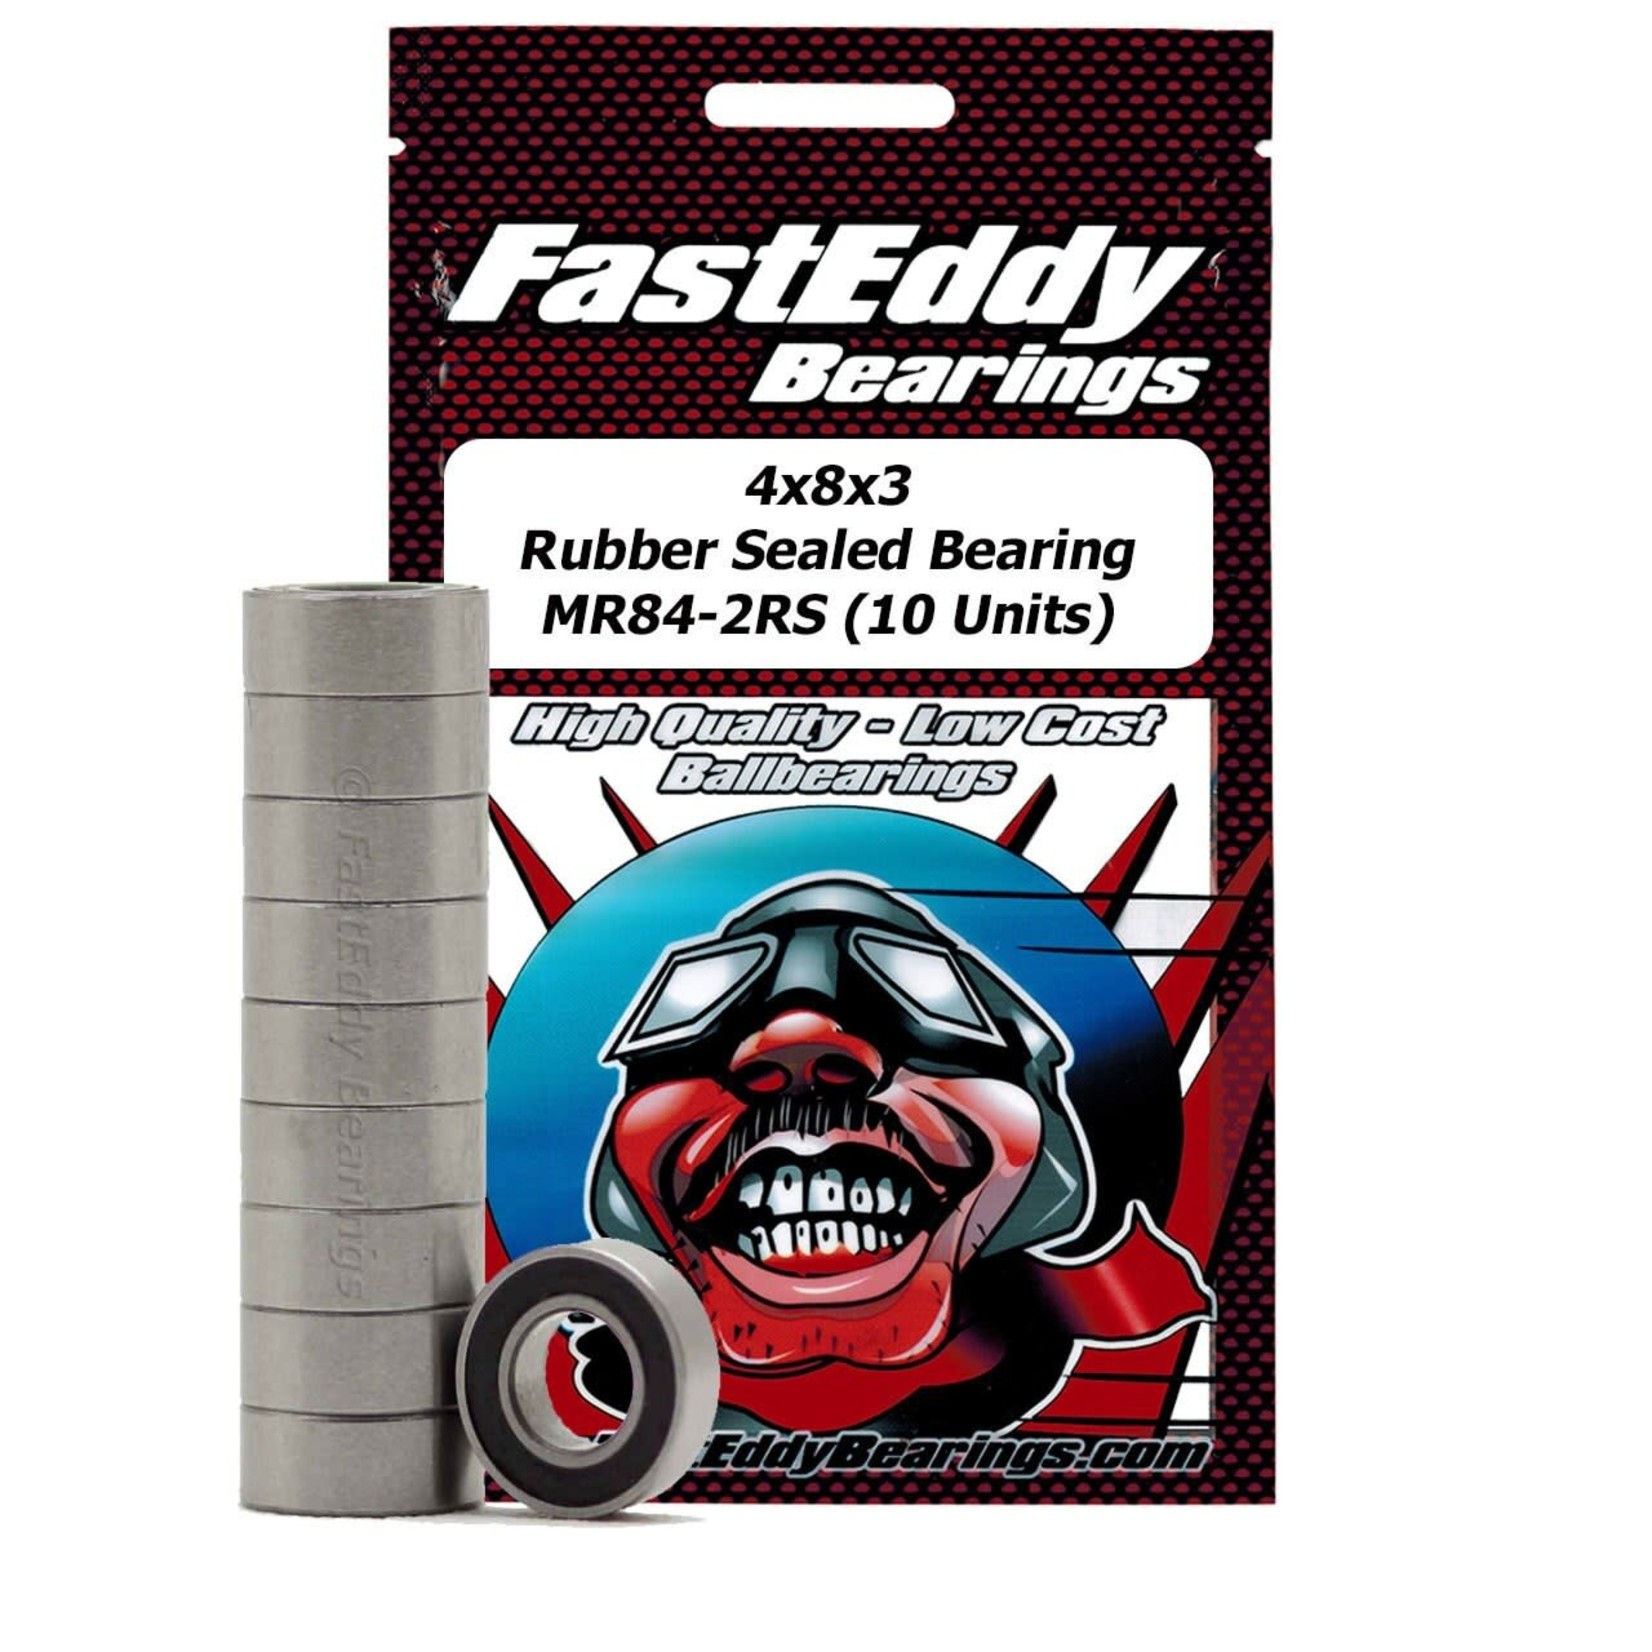 FASTEDDY 4x8x3mm Rubber Sealed Bearing (10) MR84-2RS